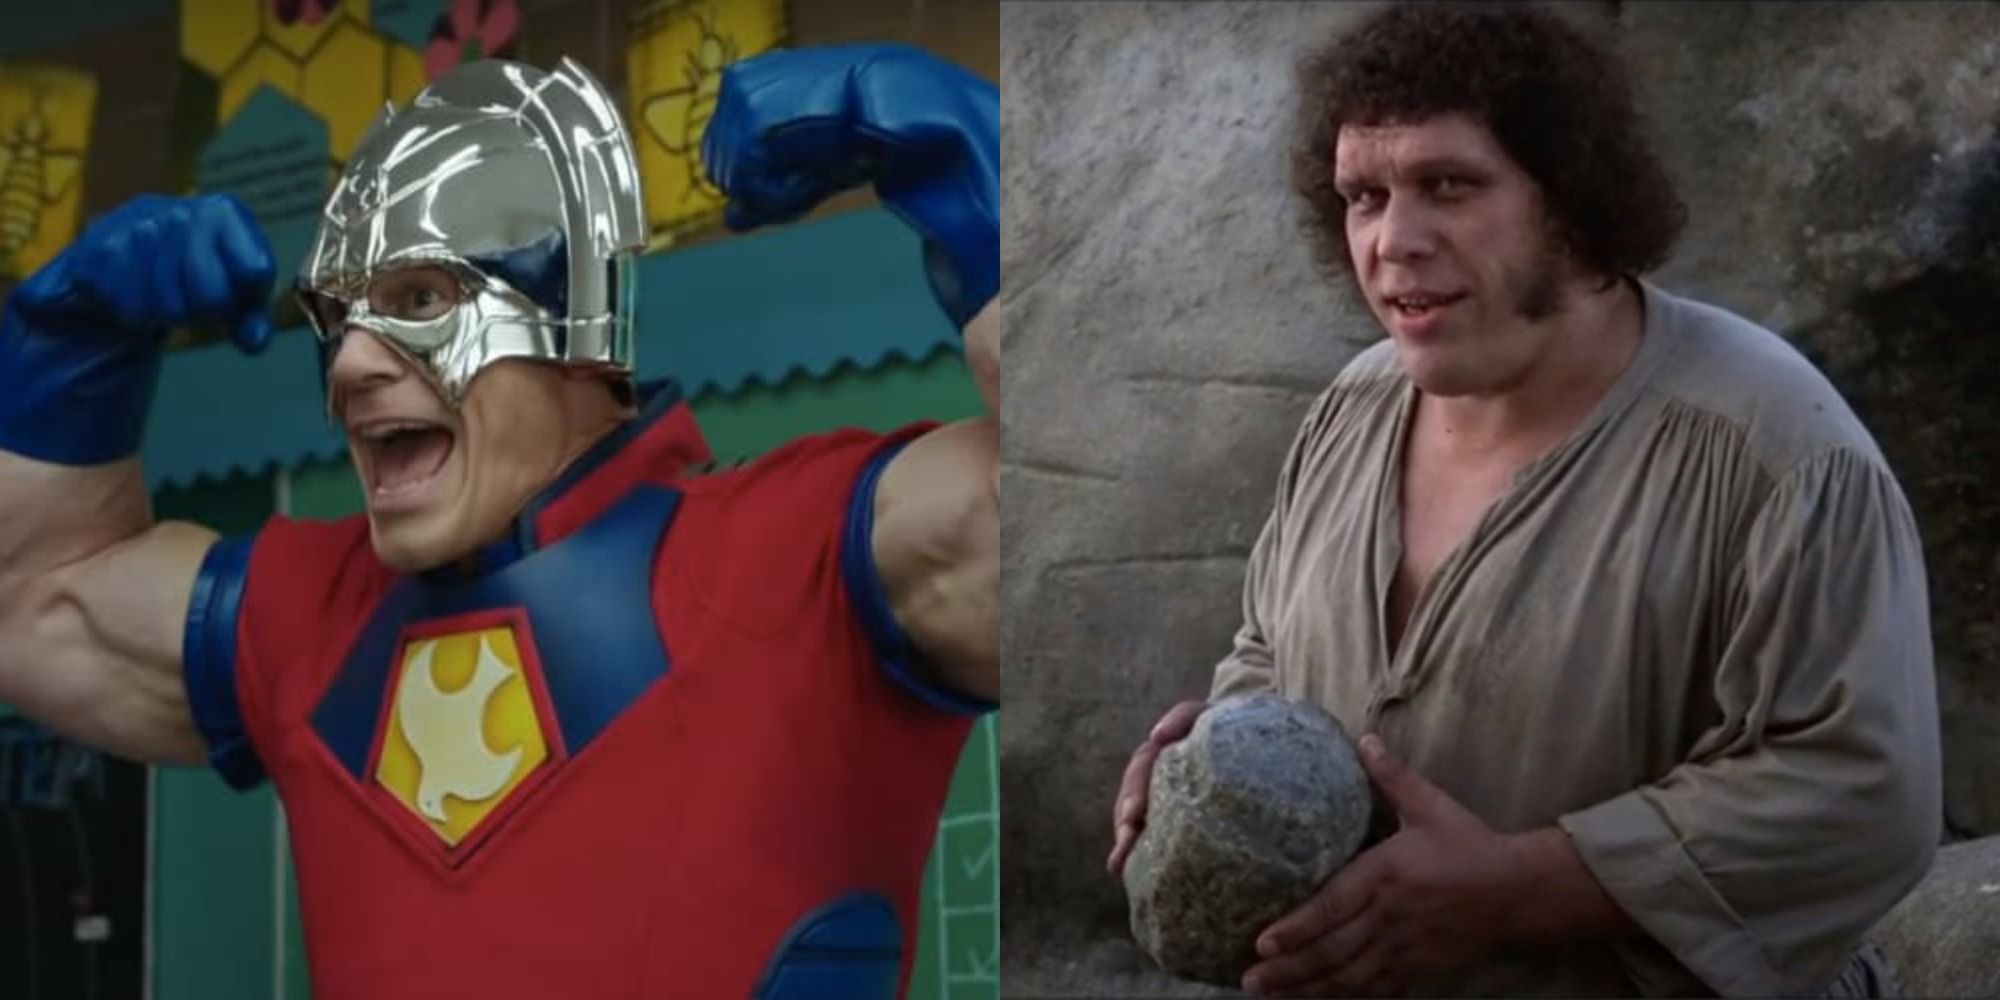 Split image showing Peacemaker flexing and Fezzek smiling in The Princess Bride